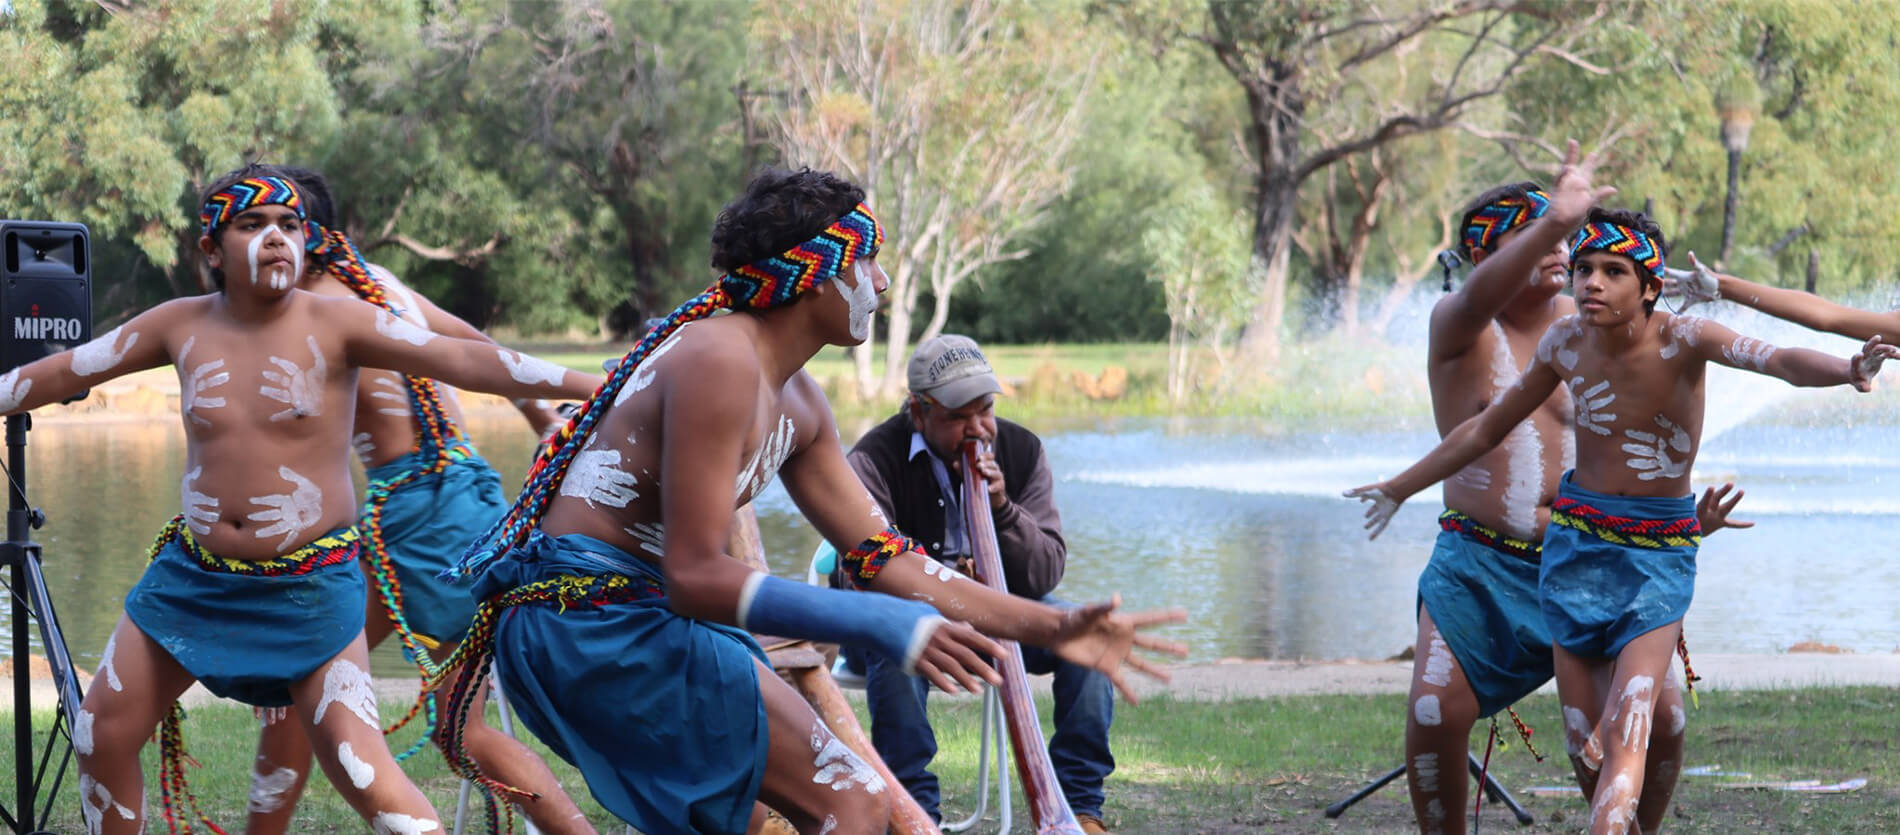 Dancers from Koolangka's Kreate perform at the 2021 NAIDOC Week Closing event at Maamba Reserve in Forrestfield